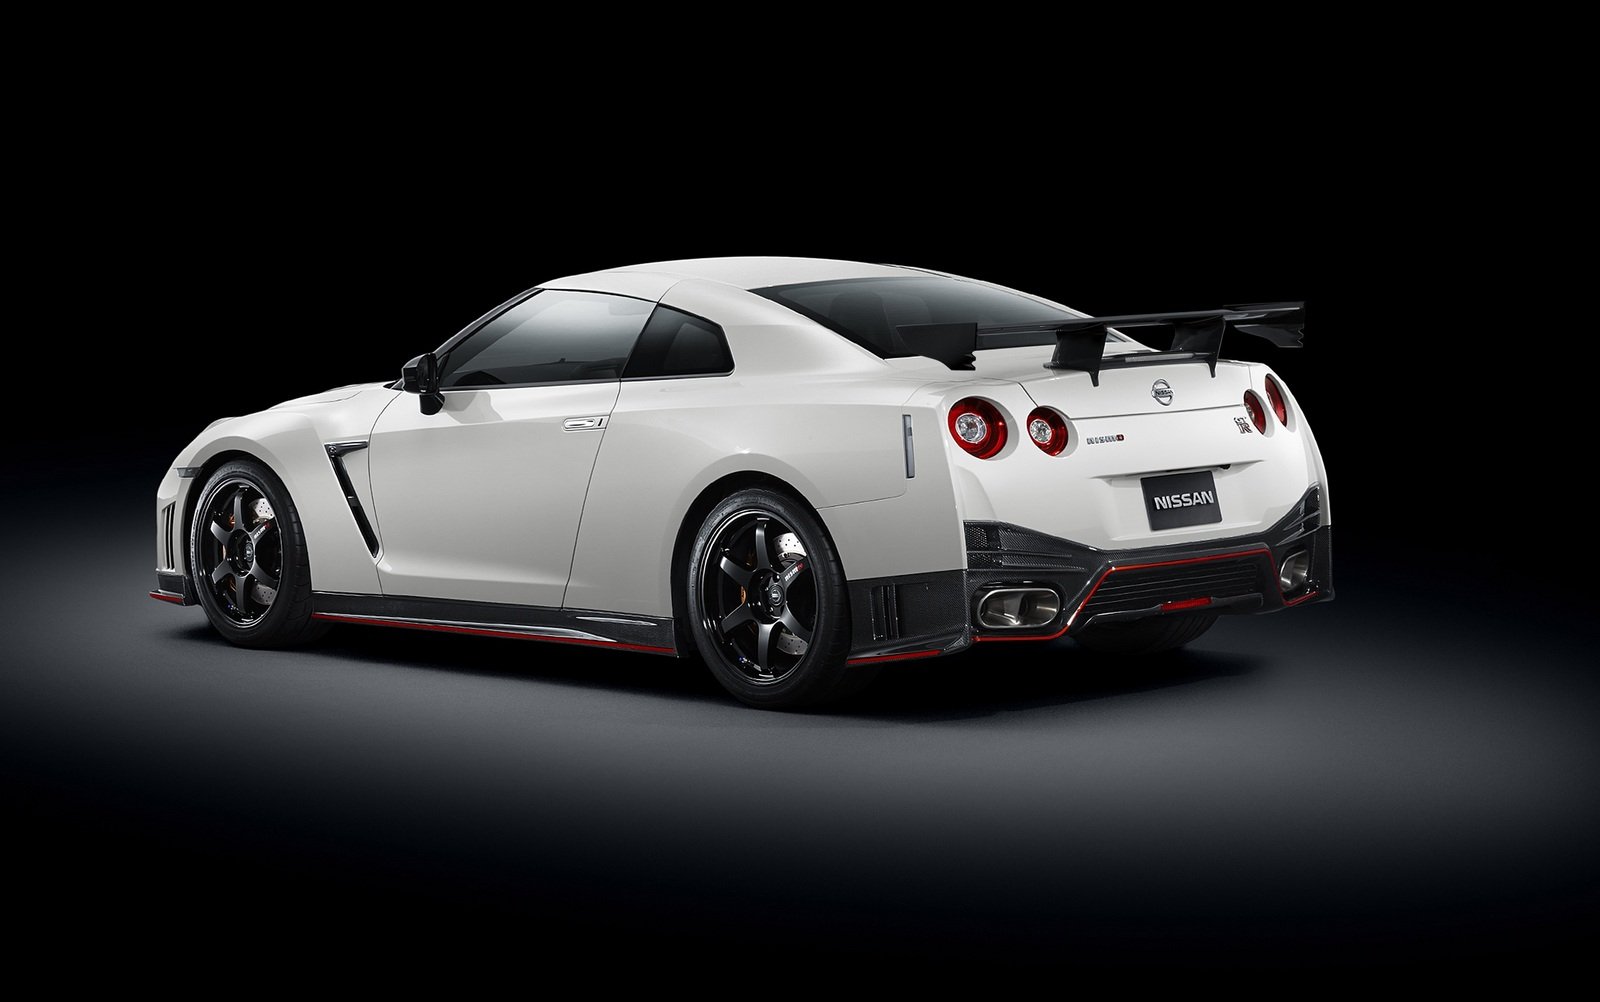 2015 Nissan GT-R NISMO Backgrounds on Wallpapers Vista